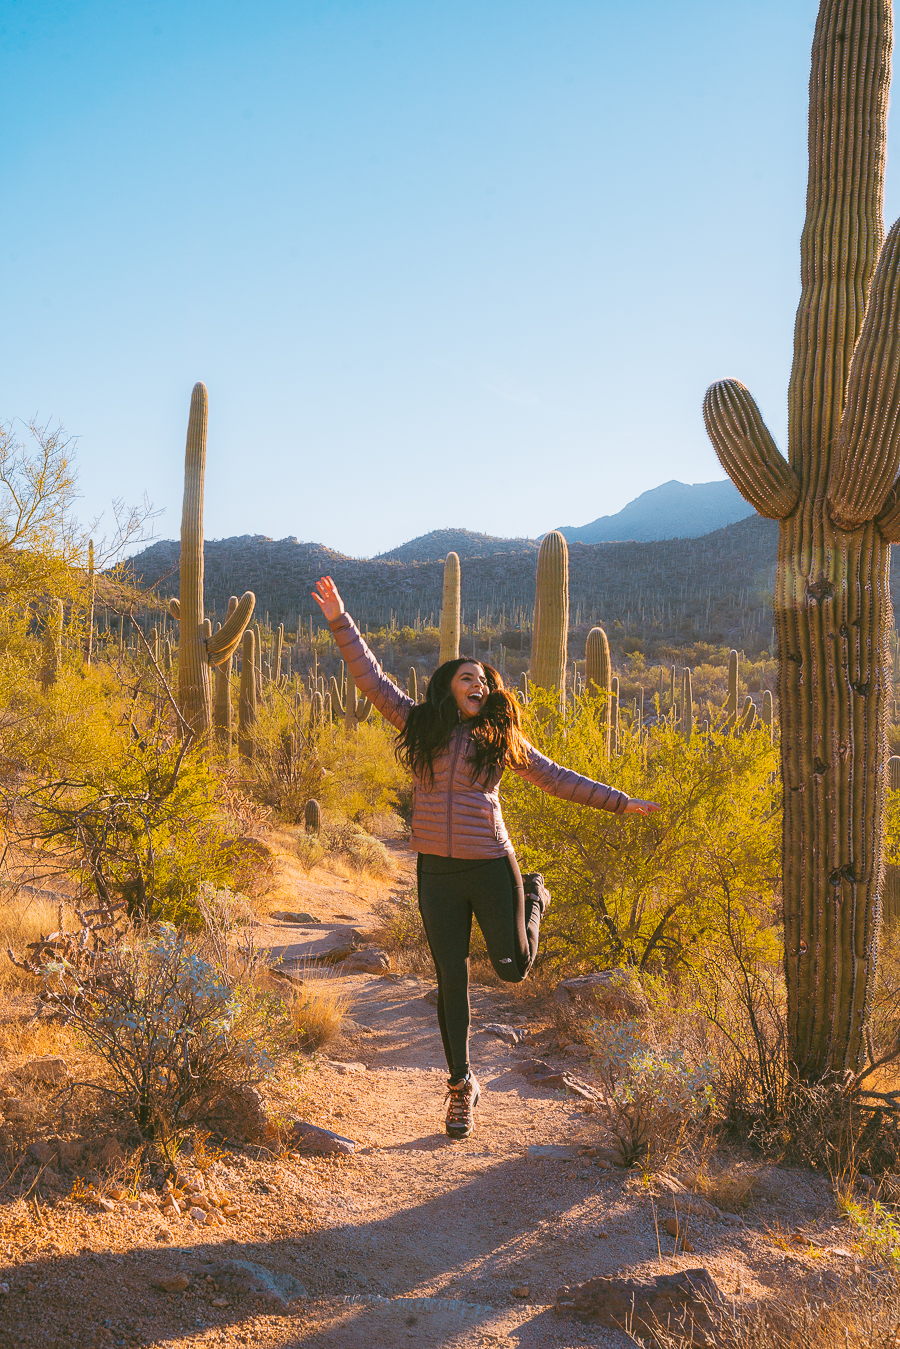 Best Hikes In Saguaro National Park: 11 Hiking Trails You'll Love - The  Wandering Queen